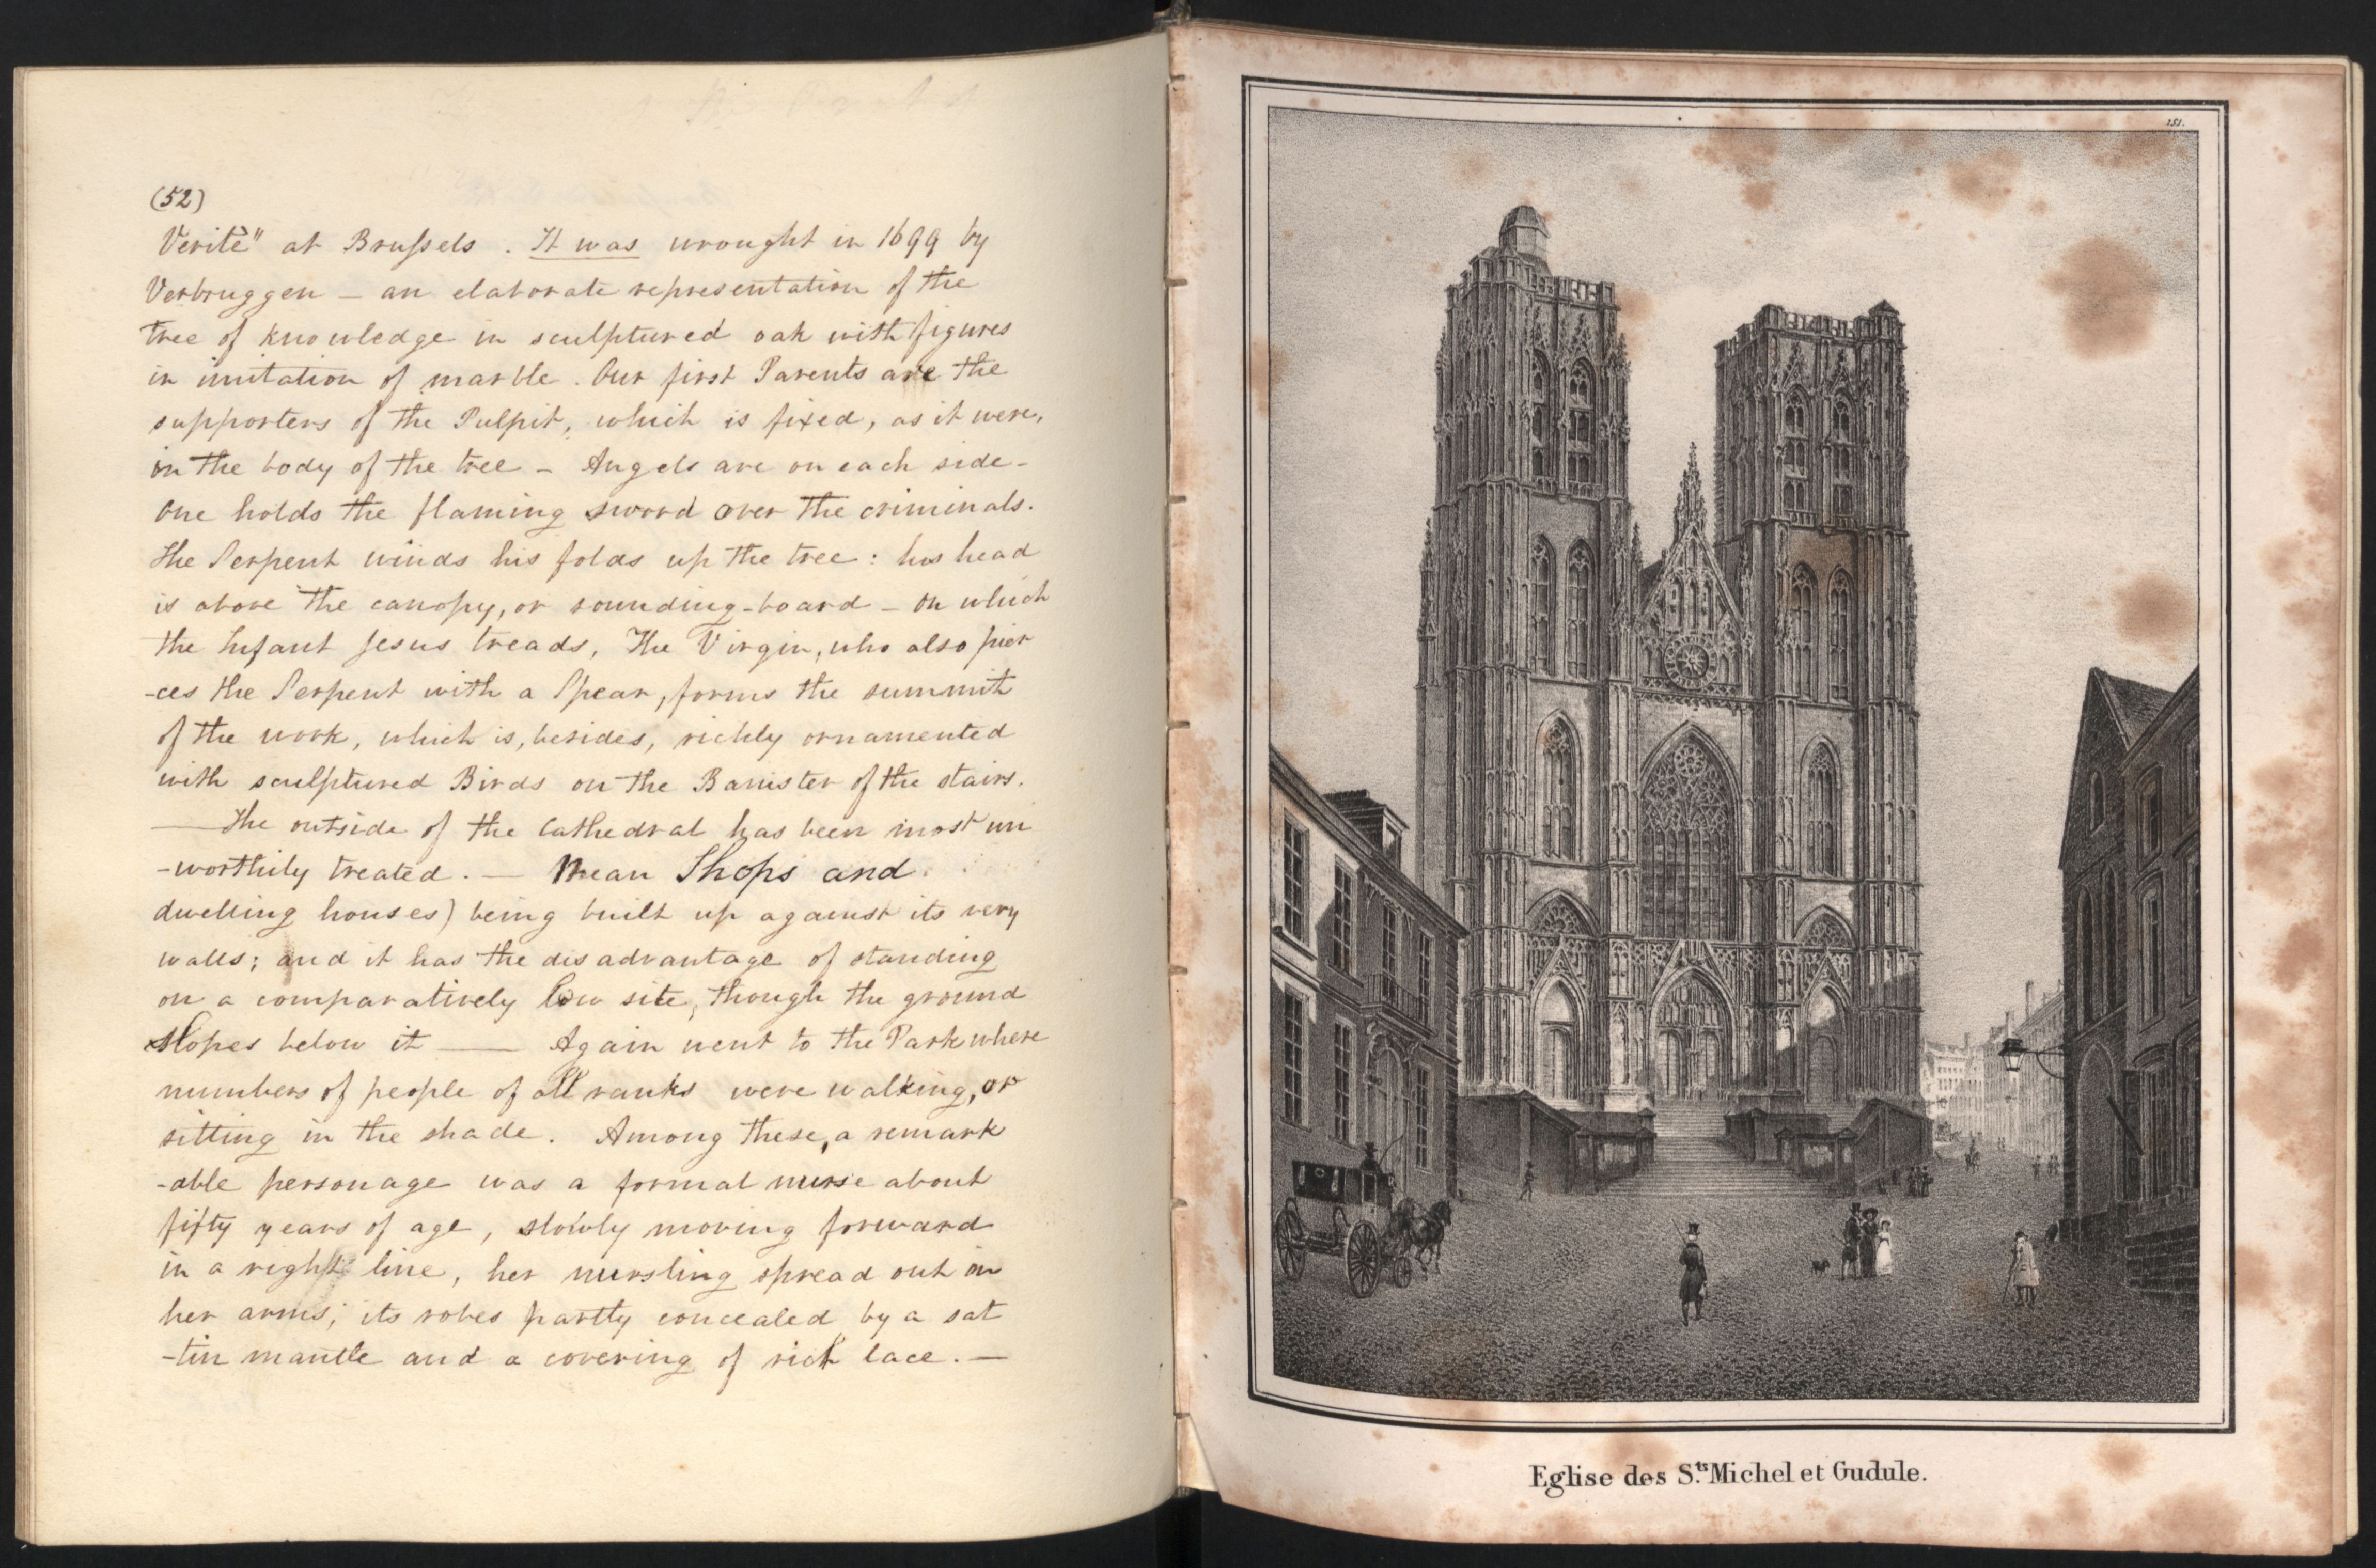 DCMS 90, 52, Journal of a Tour on the Continent. (Courtesy: The Wordsworth Trust)